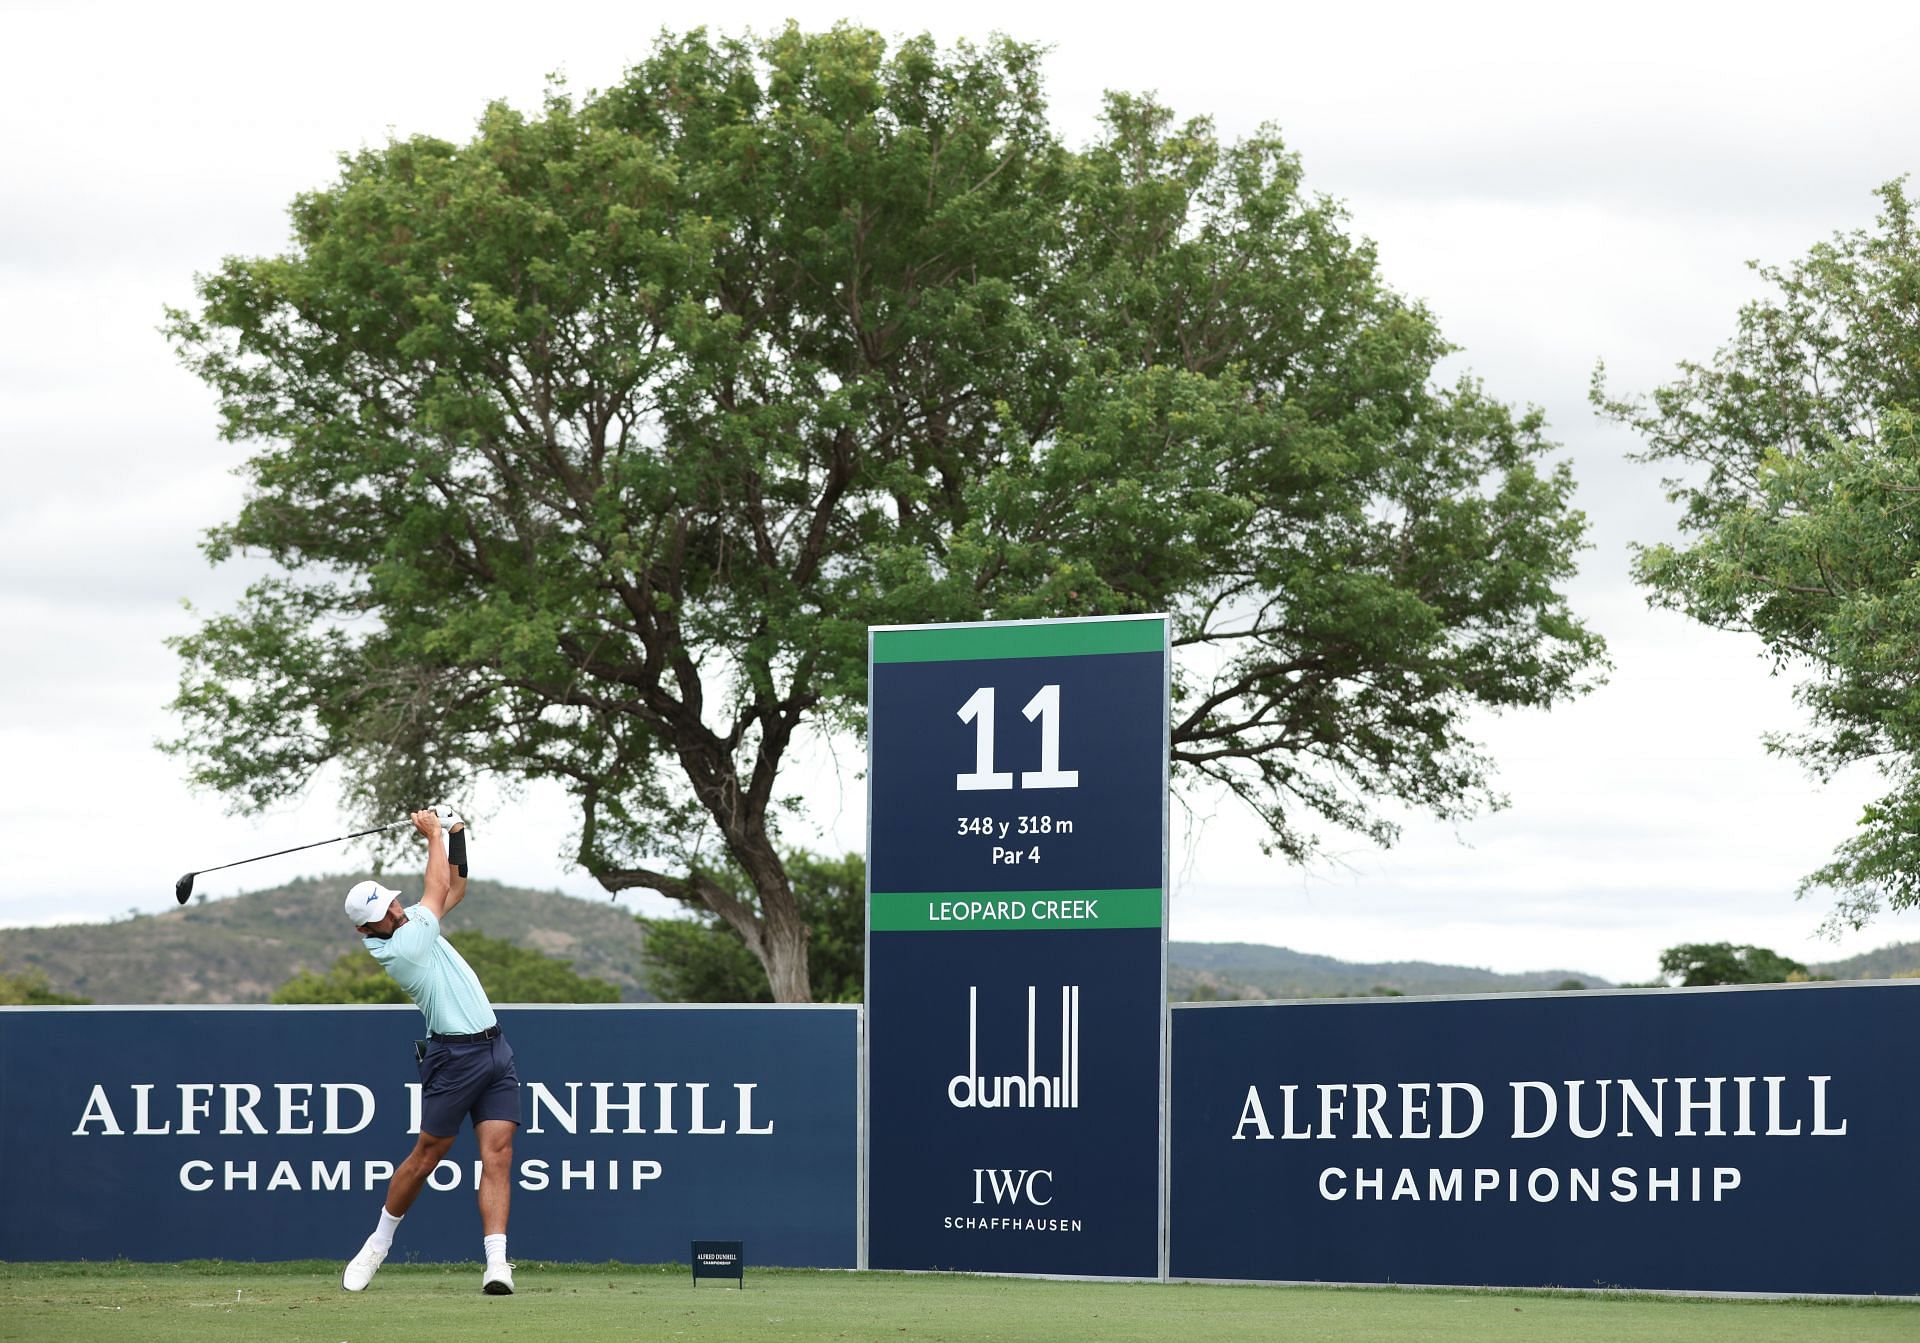 Alfred Dunhill Championship - Previews